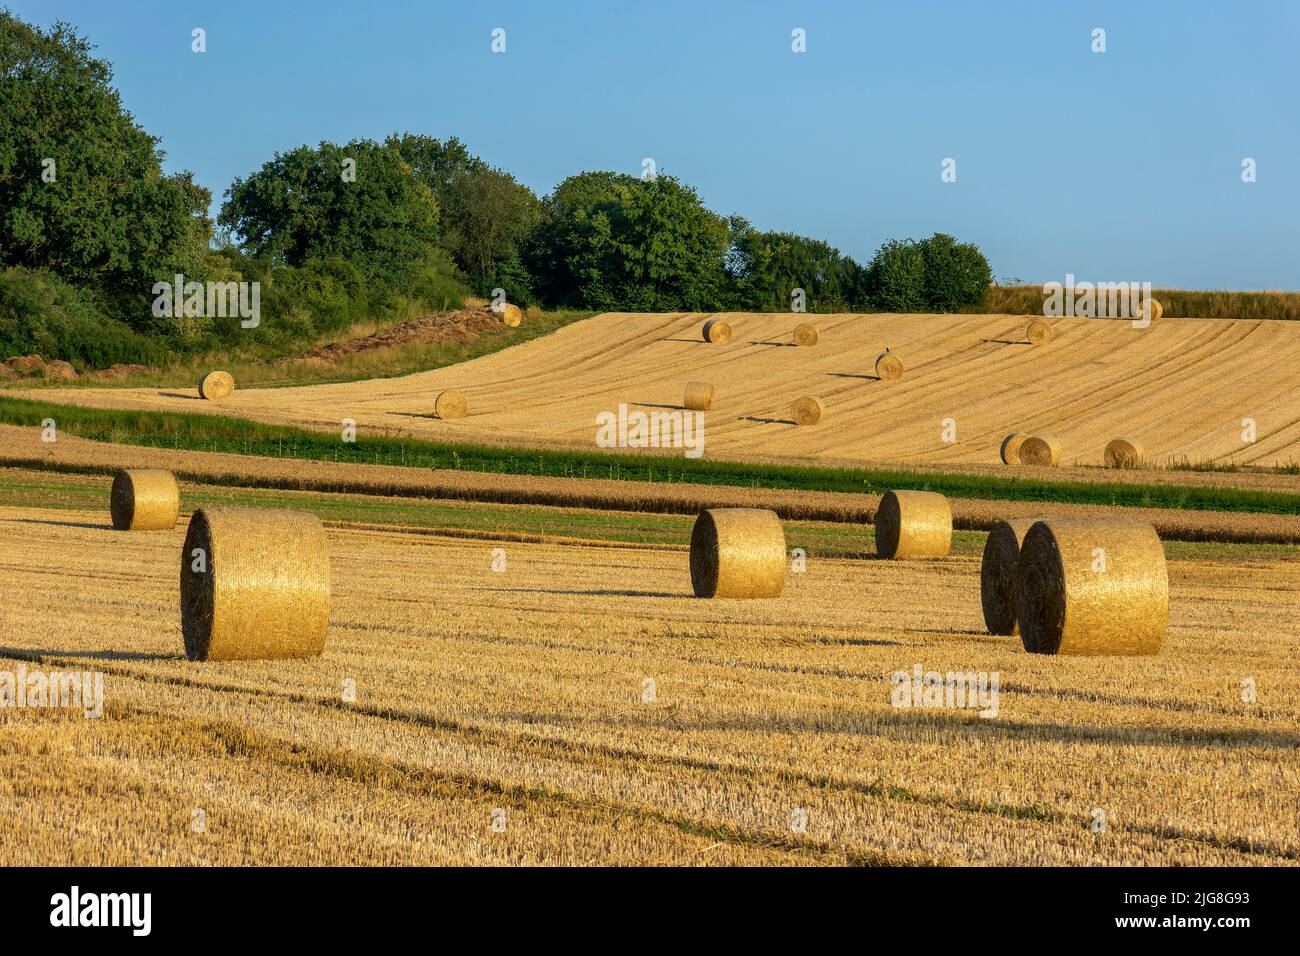 Round bales of straw on a stubble field after grain harvest. Stock Photo